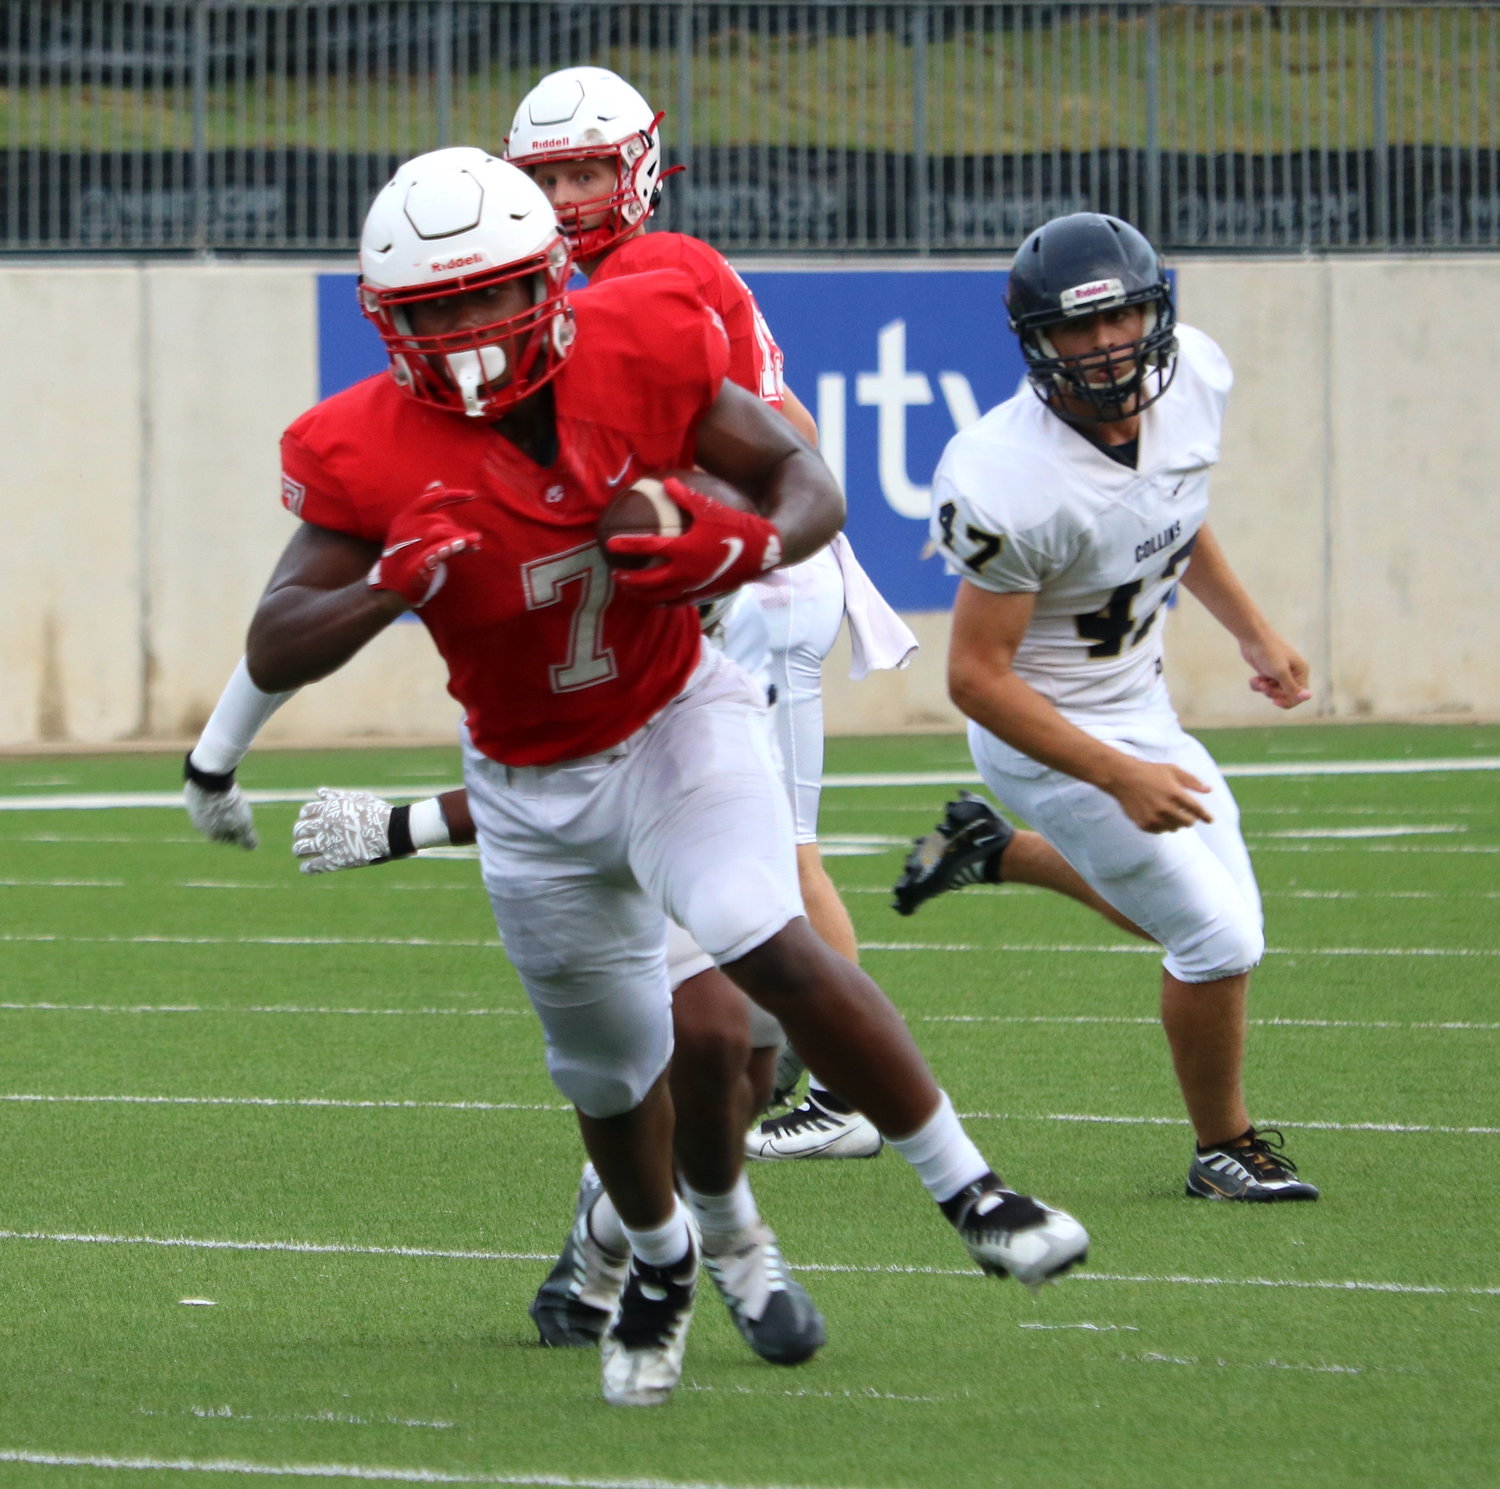 Katy’s Ramarian Tillman fights through contact during Katy’s scrimmage against Klein Collins on Friday at Legacy Stadium.